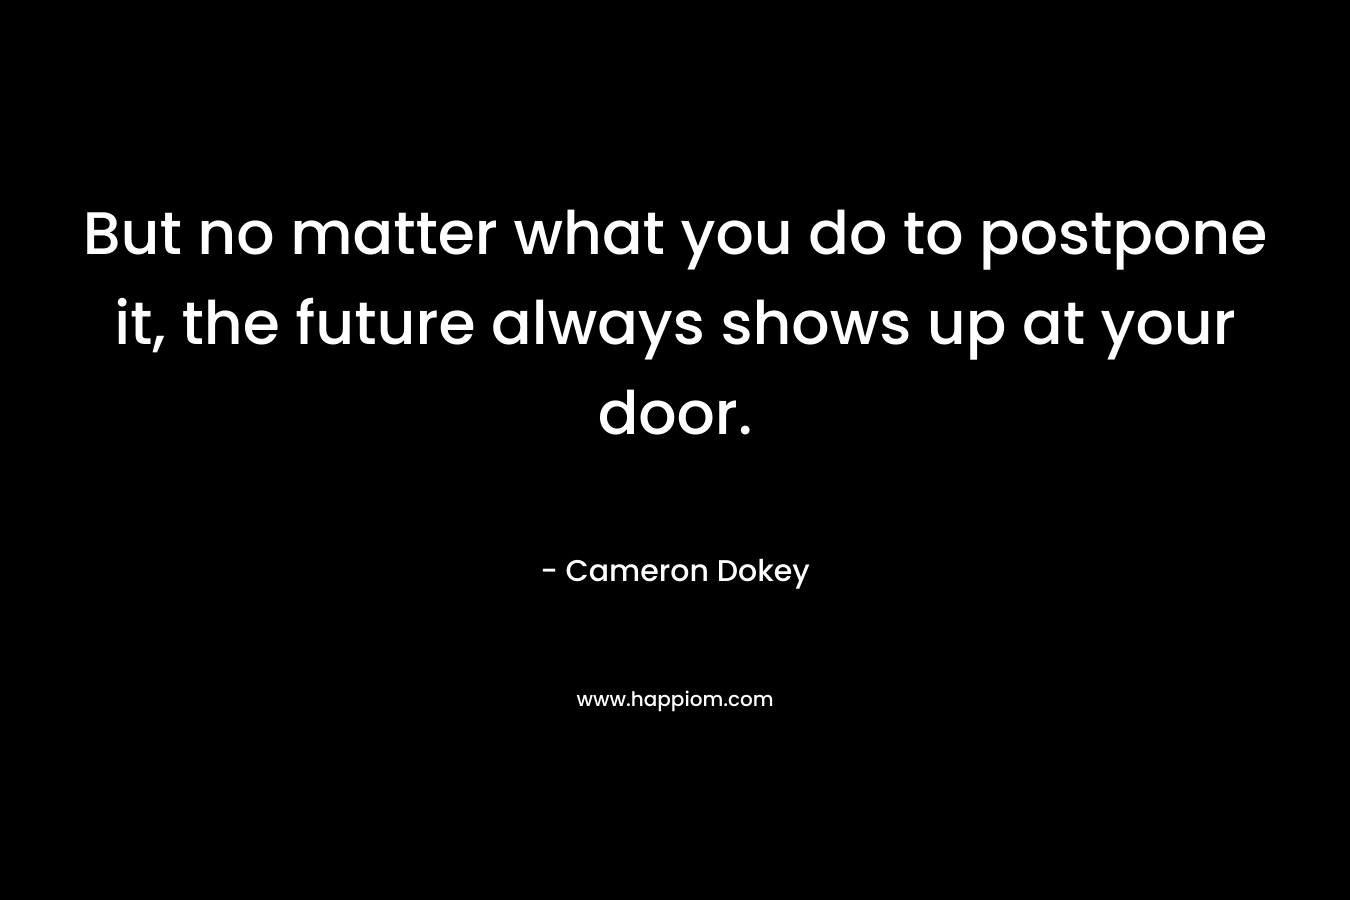 But no matter what you do to postpone it, the future always shows up at your door. – Cameron Dokey